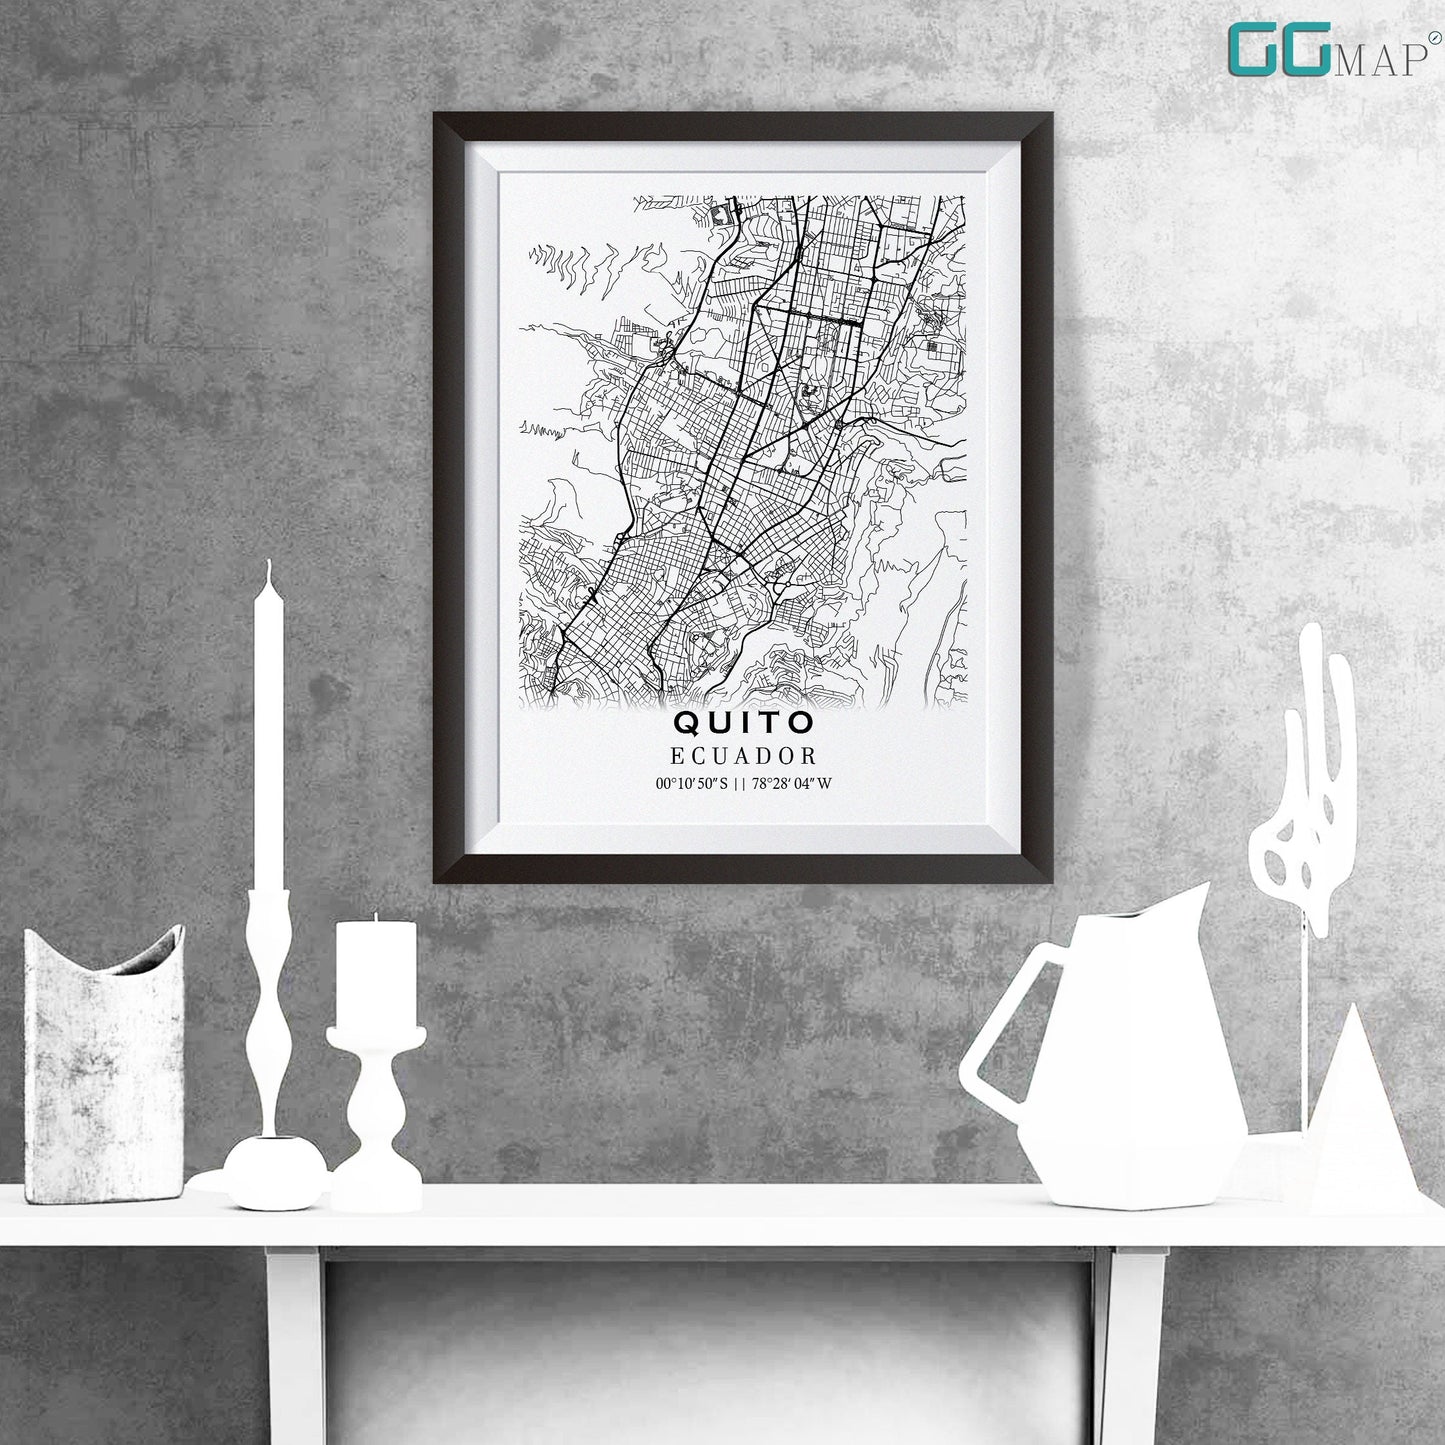 City map of QUITO - Home Decor - Wall decor - Office map - Travel map - Print map - Poster city map - Quito map - Map art - Ecuador